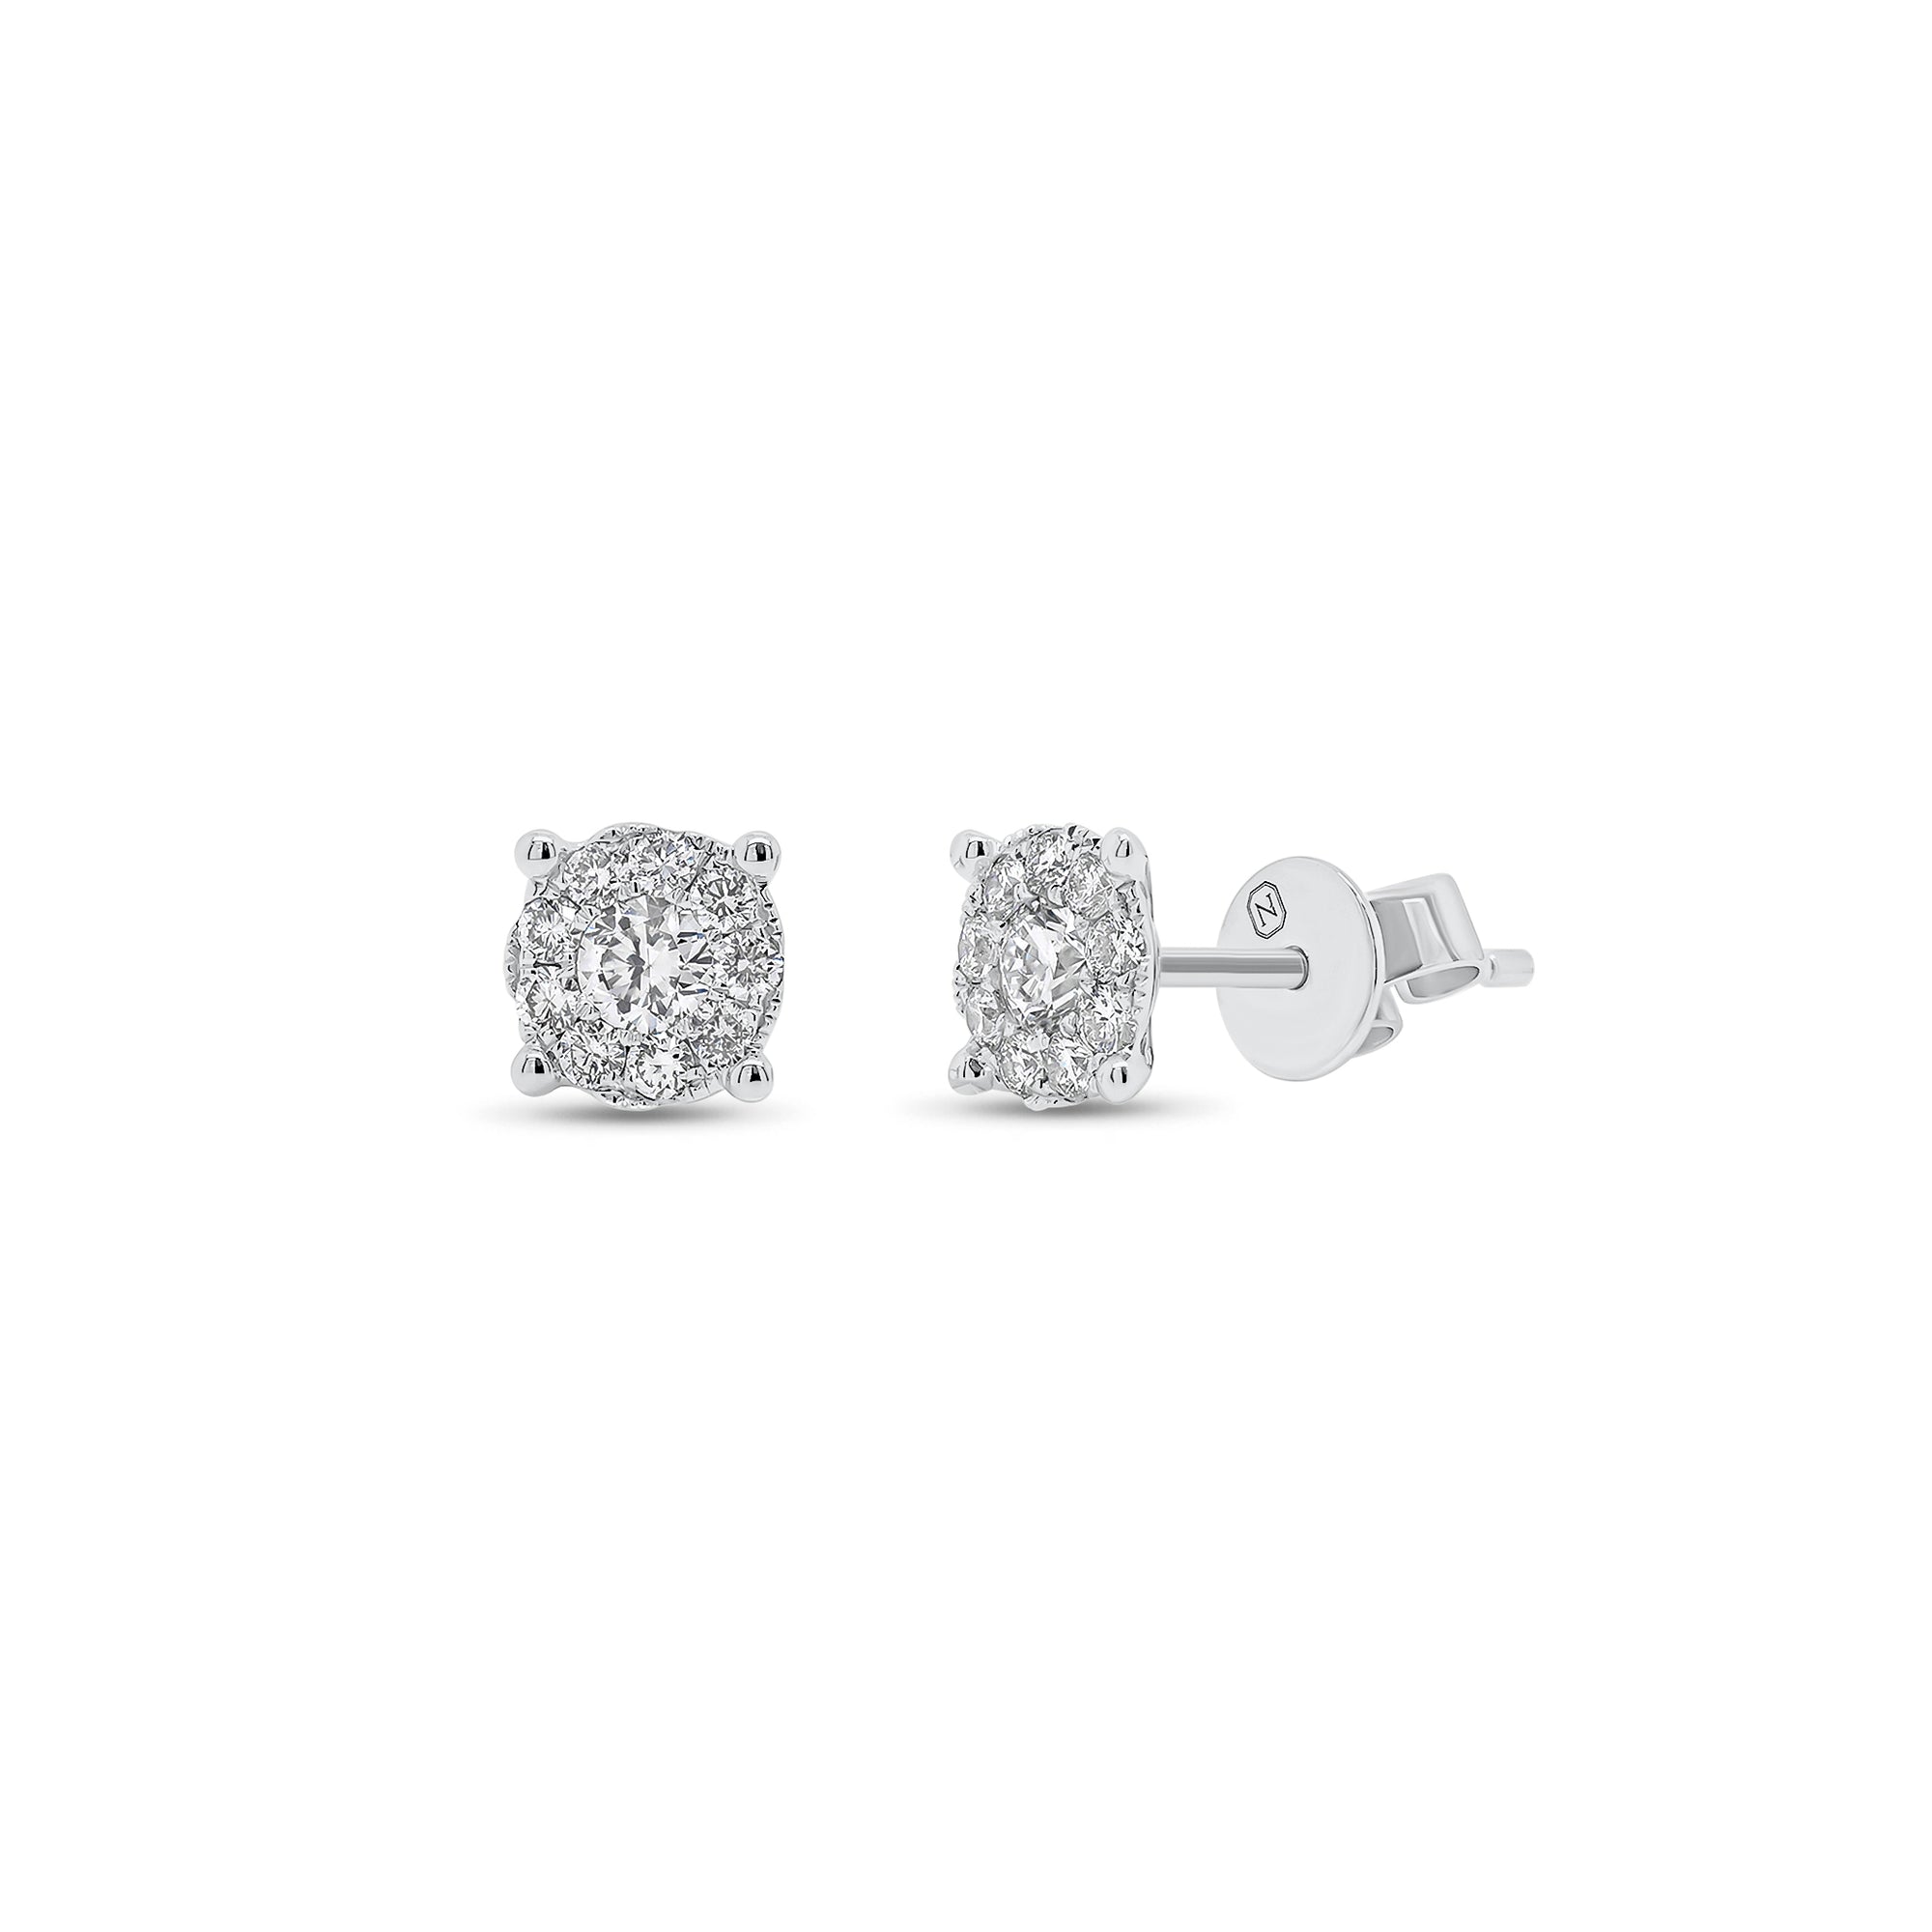 0.46 ct Halo Diamond Stud Earrings - 18K gold weighing 1.23 grams  - 2 round diamonds weighing 0.22 carats  - 18 round diamonds weighing 0.24 carats